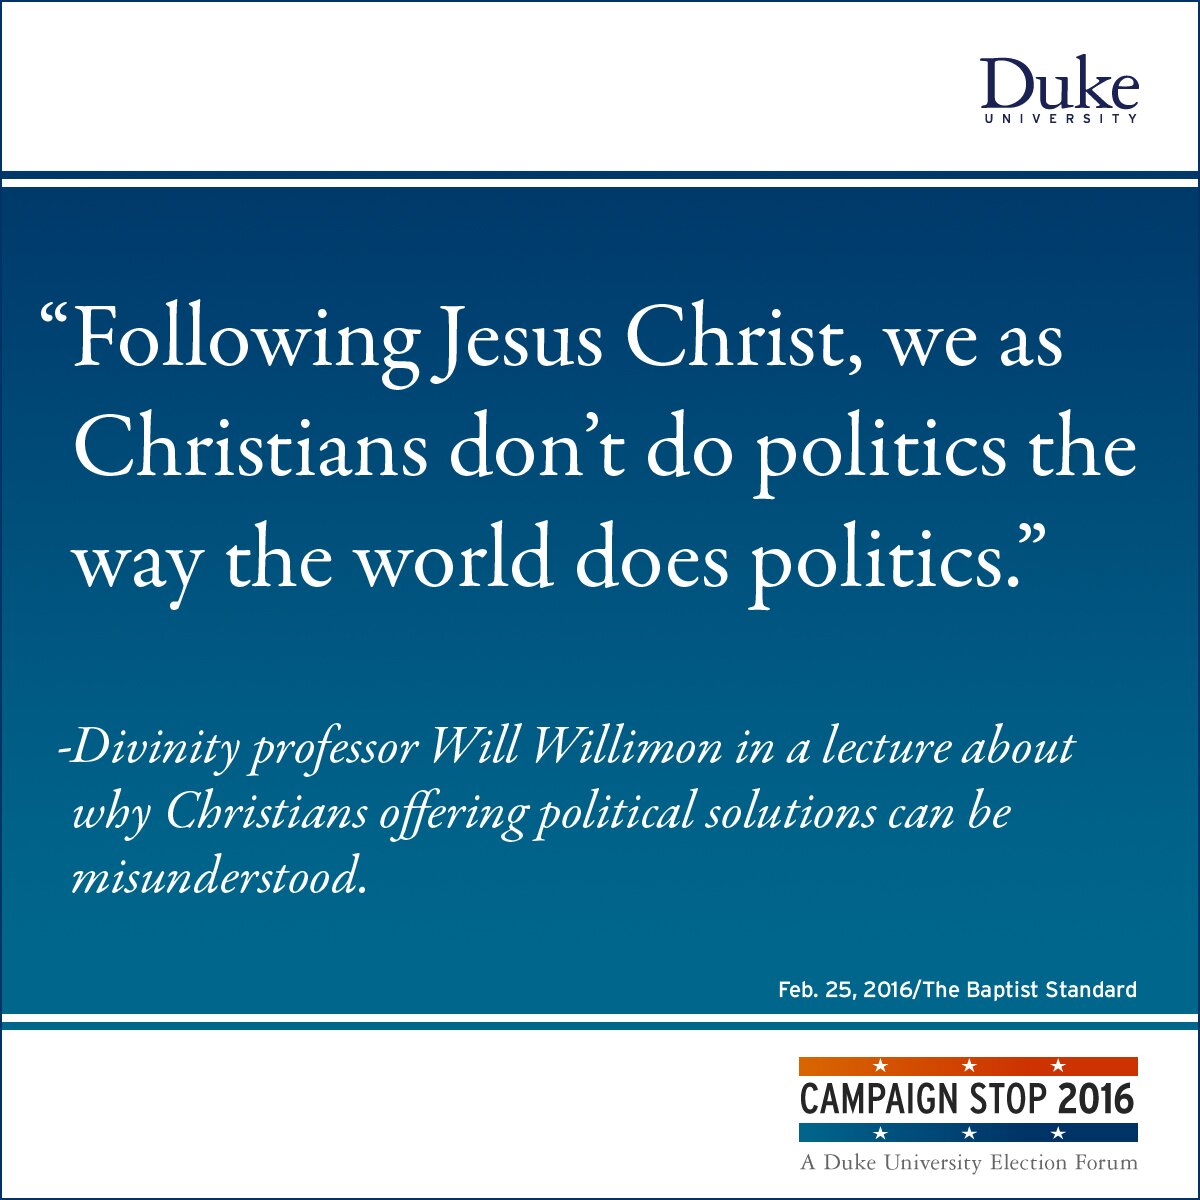 “Following Jesus Christ, we as Christians don’t do politics the way the world does politics.” -Divinity professor Will Willimon in a lecture about why Christians offering political solutions can be misunderstood.